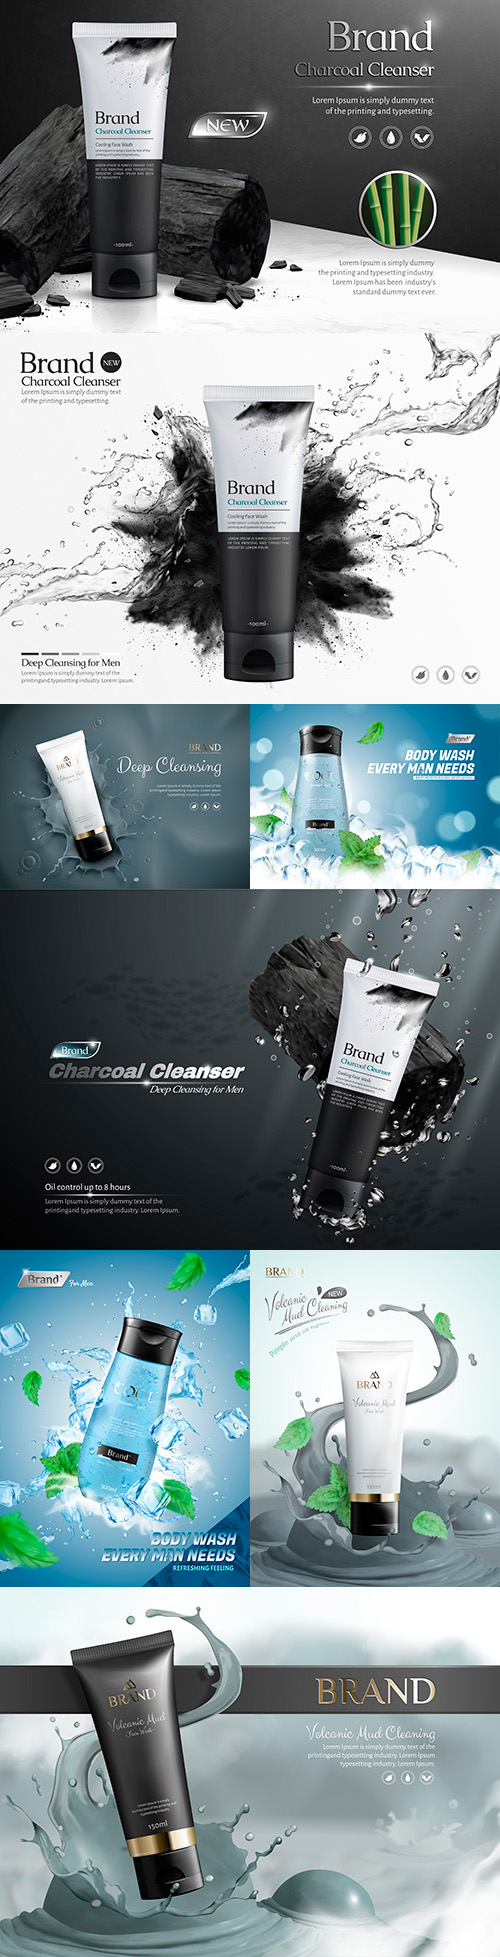 Male skin care products and refreshing shower gel 3d illustrations
